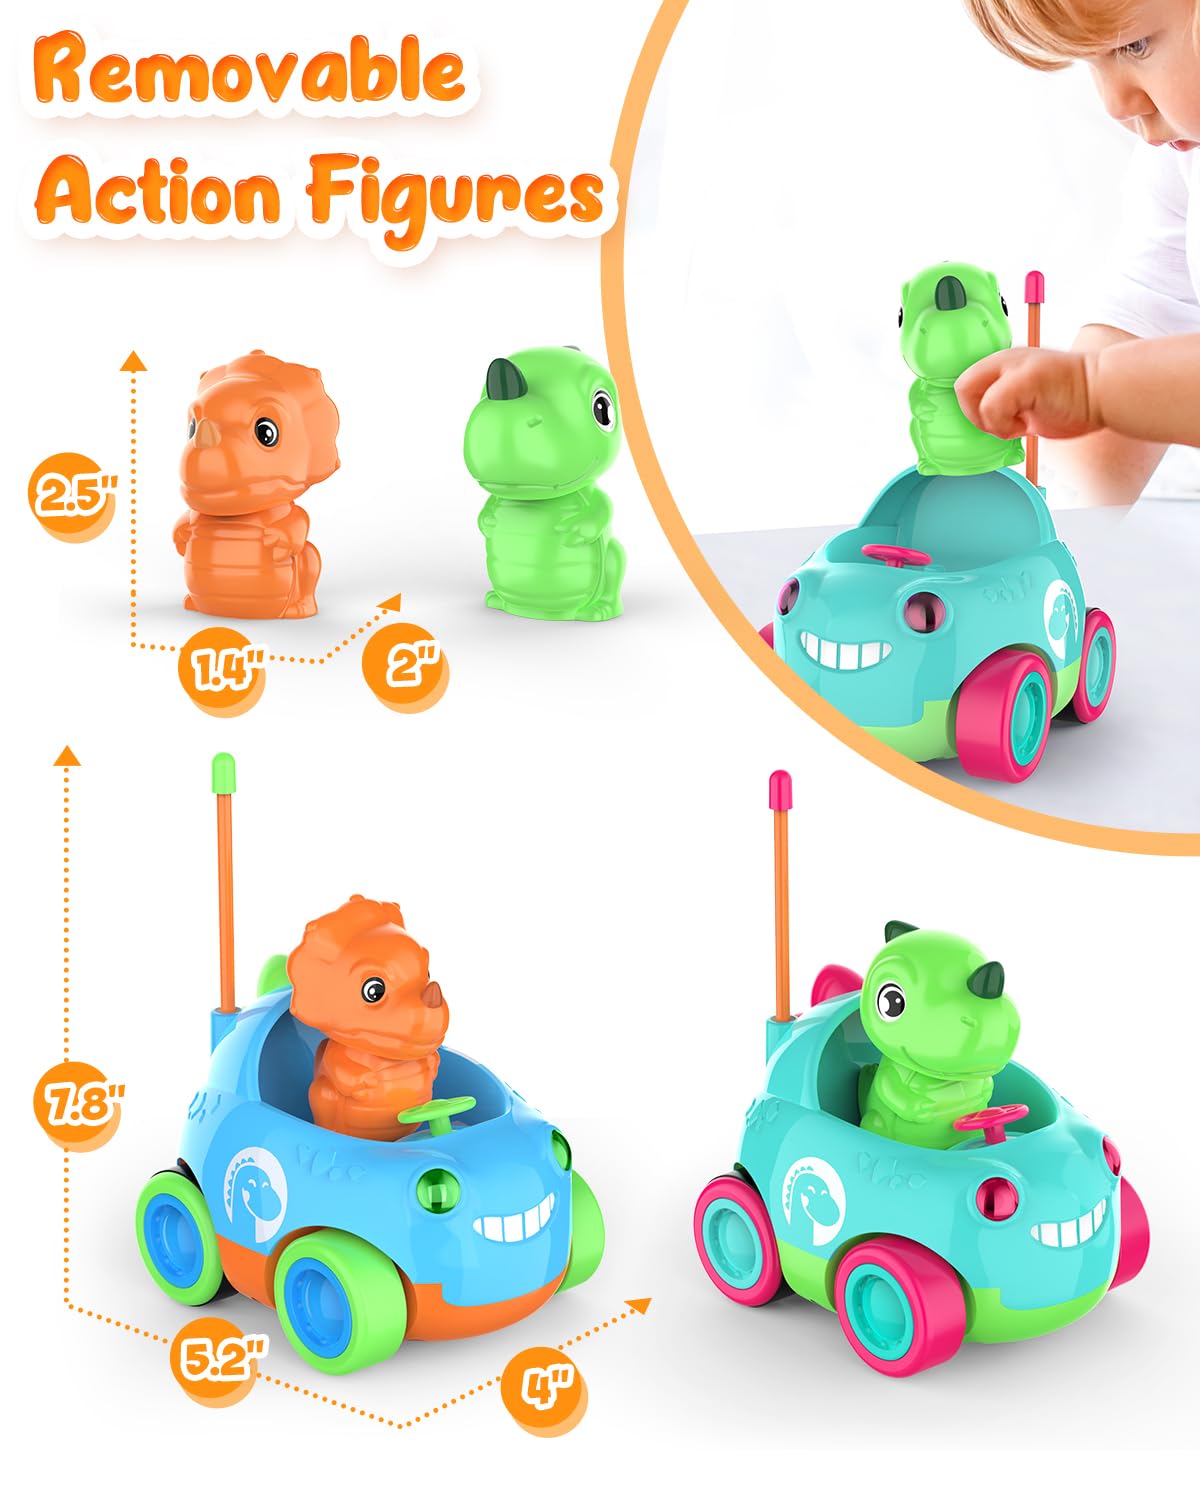 Qumcou Toddler Remote Control Car, Two Cartoon RC Cars for Toddlers, Dinosaur Toys for Kids 3-5, Birthday Gift for Boys & Girls, Car Toys with LED Lights & Music